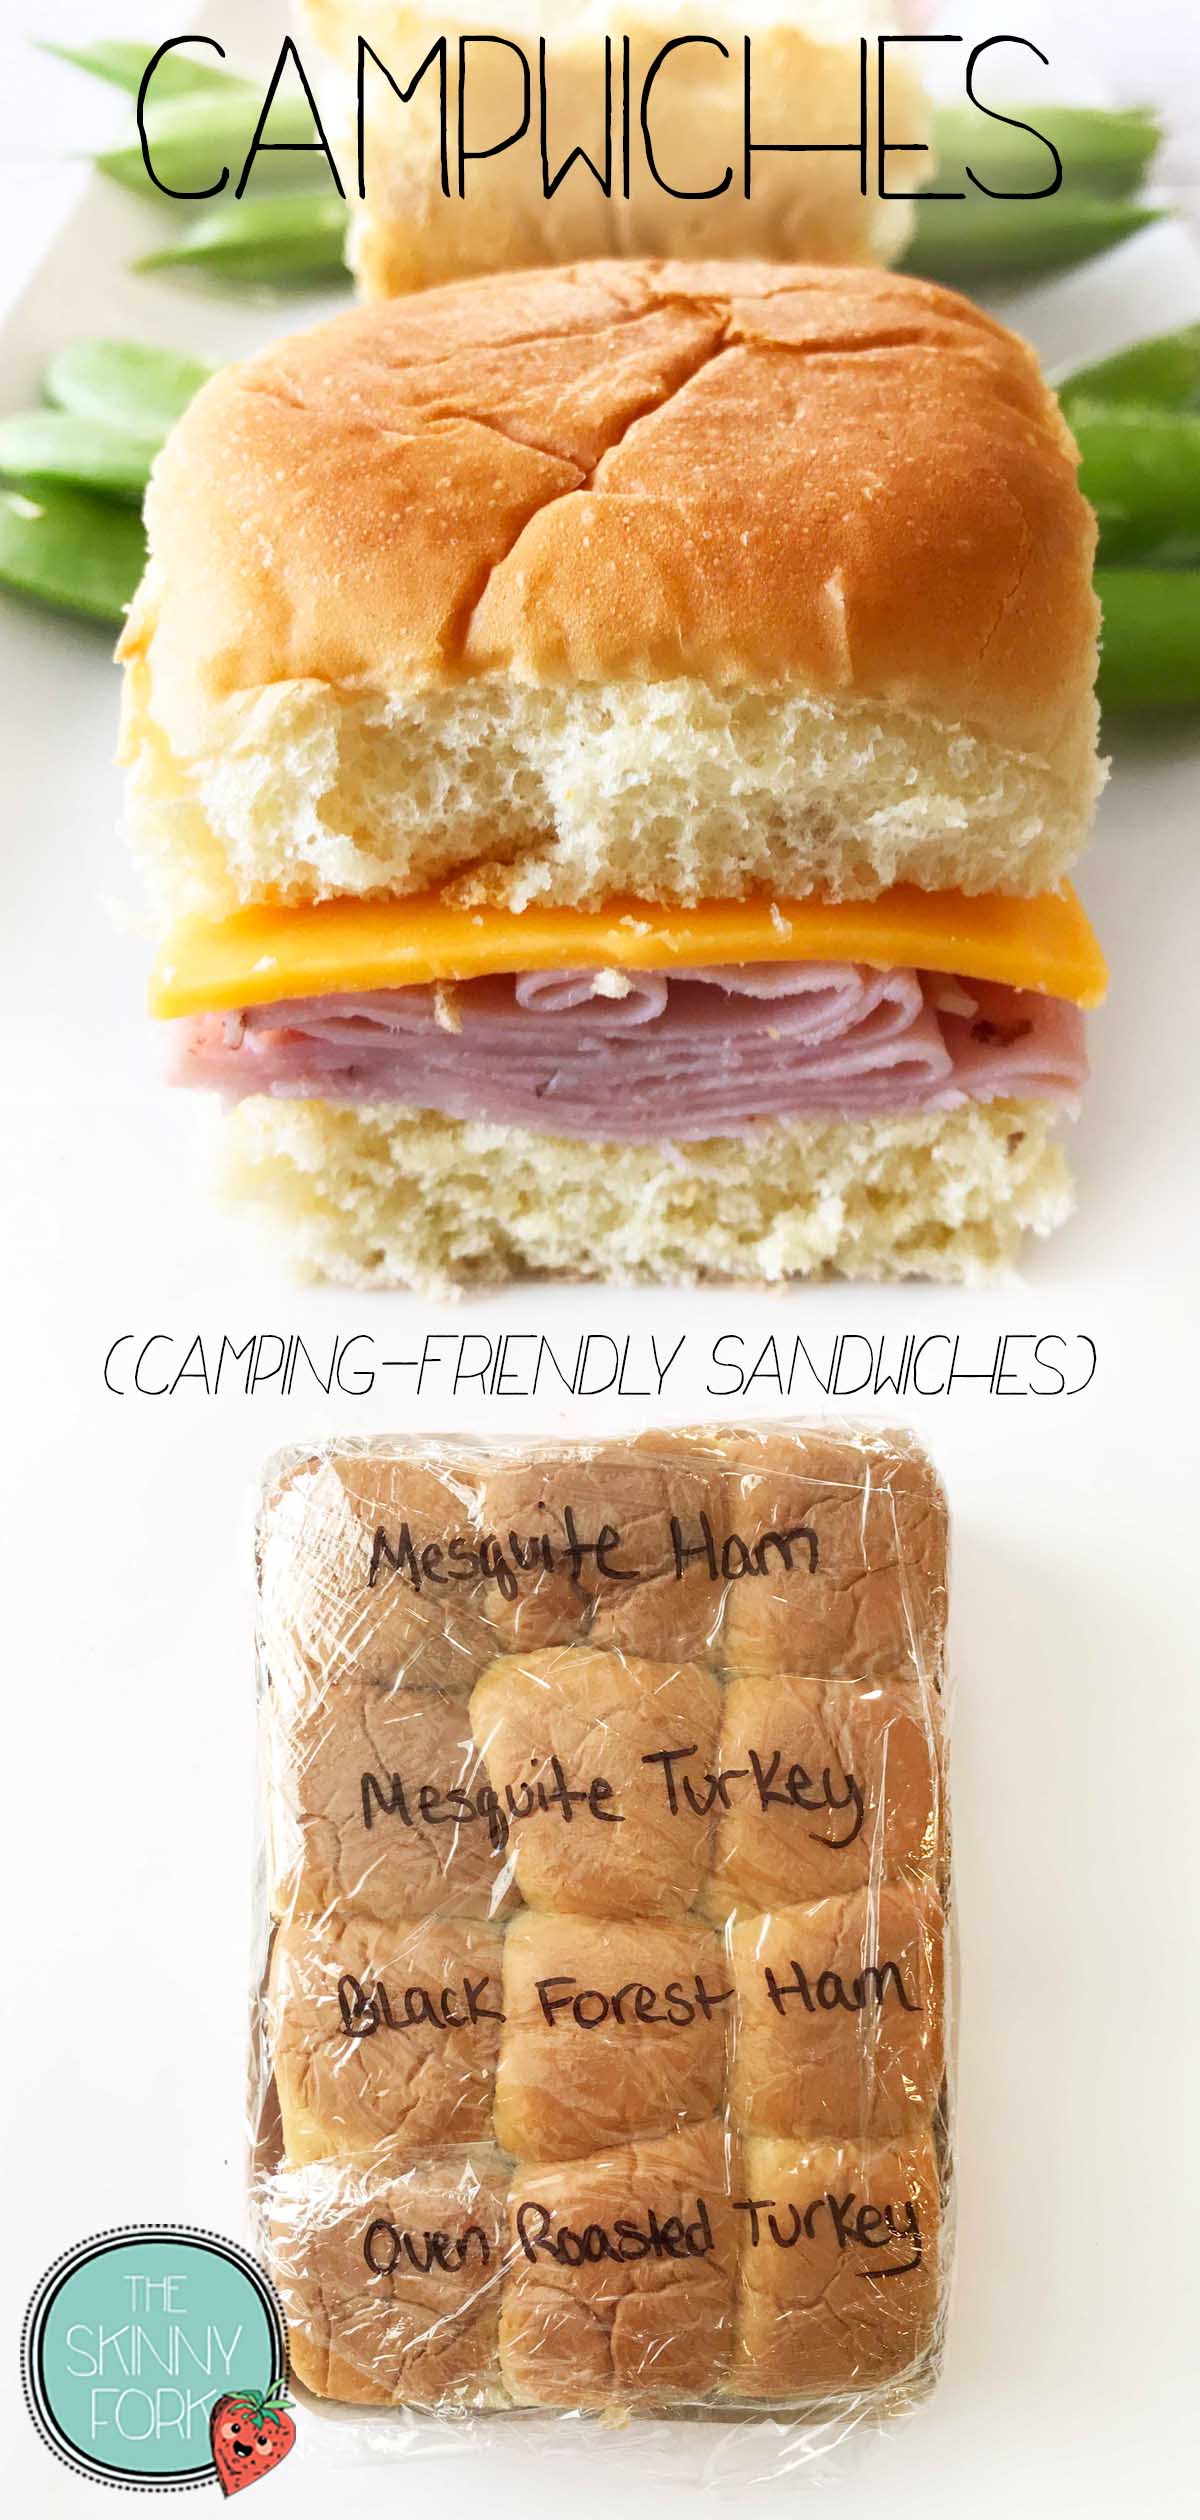 Campwiches (Camping-Friendly Sandwiches)